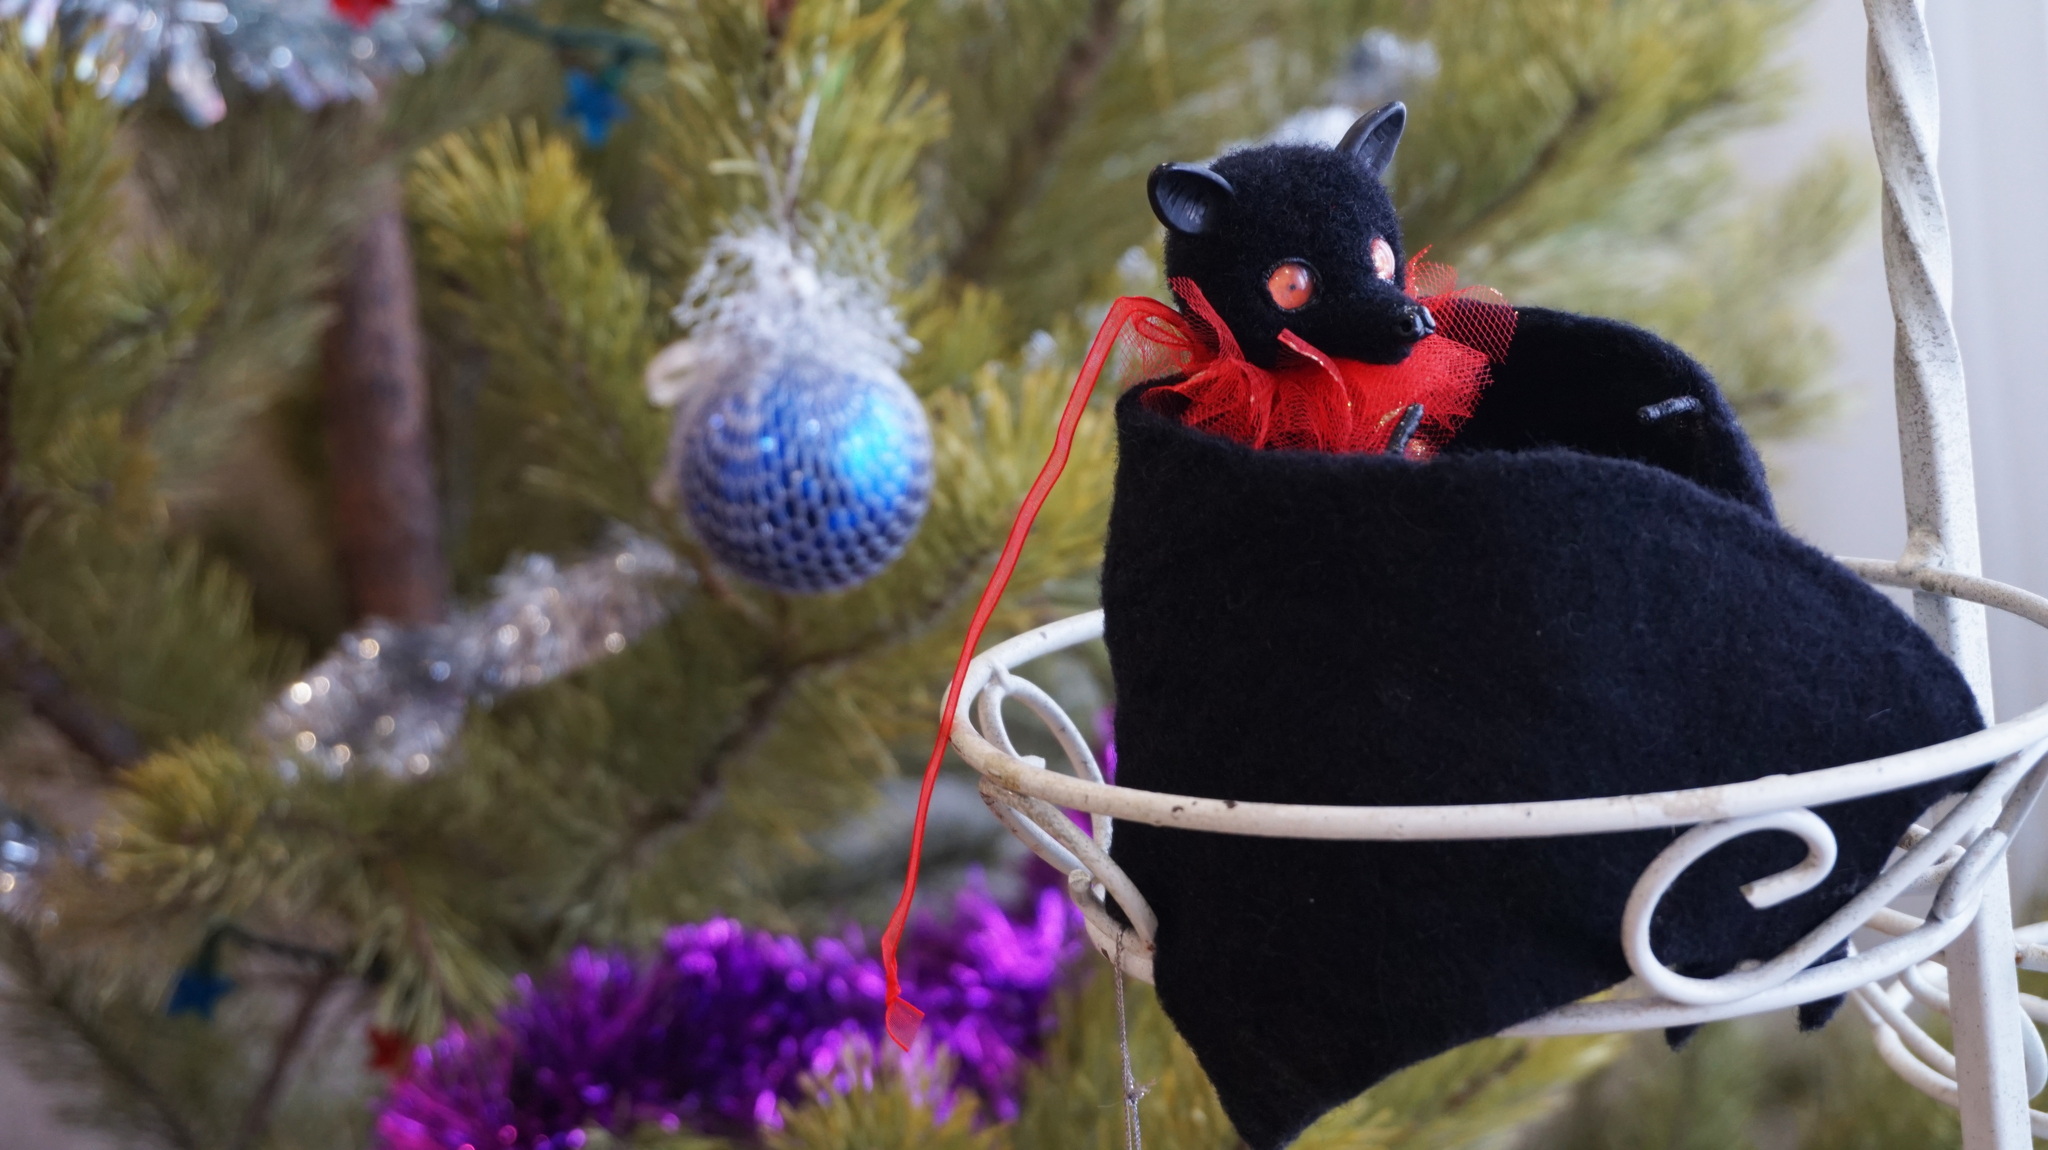 Bat toy. Do-it-yourself flying fox or fruit bat - My, Author's toy, Soft toy, Handmade, Hobby, Bats, Bat, Vampires, wildlife, Naturally, Realism, Toys for adults, Toys, Collectible figurines, Wild animals, Claws, Collection, Collector, Gothic, Polymer clay, Longpost